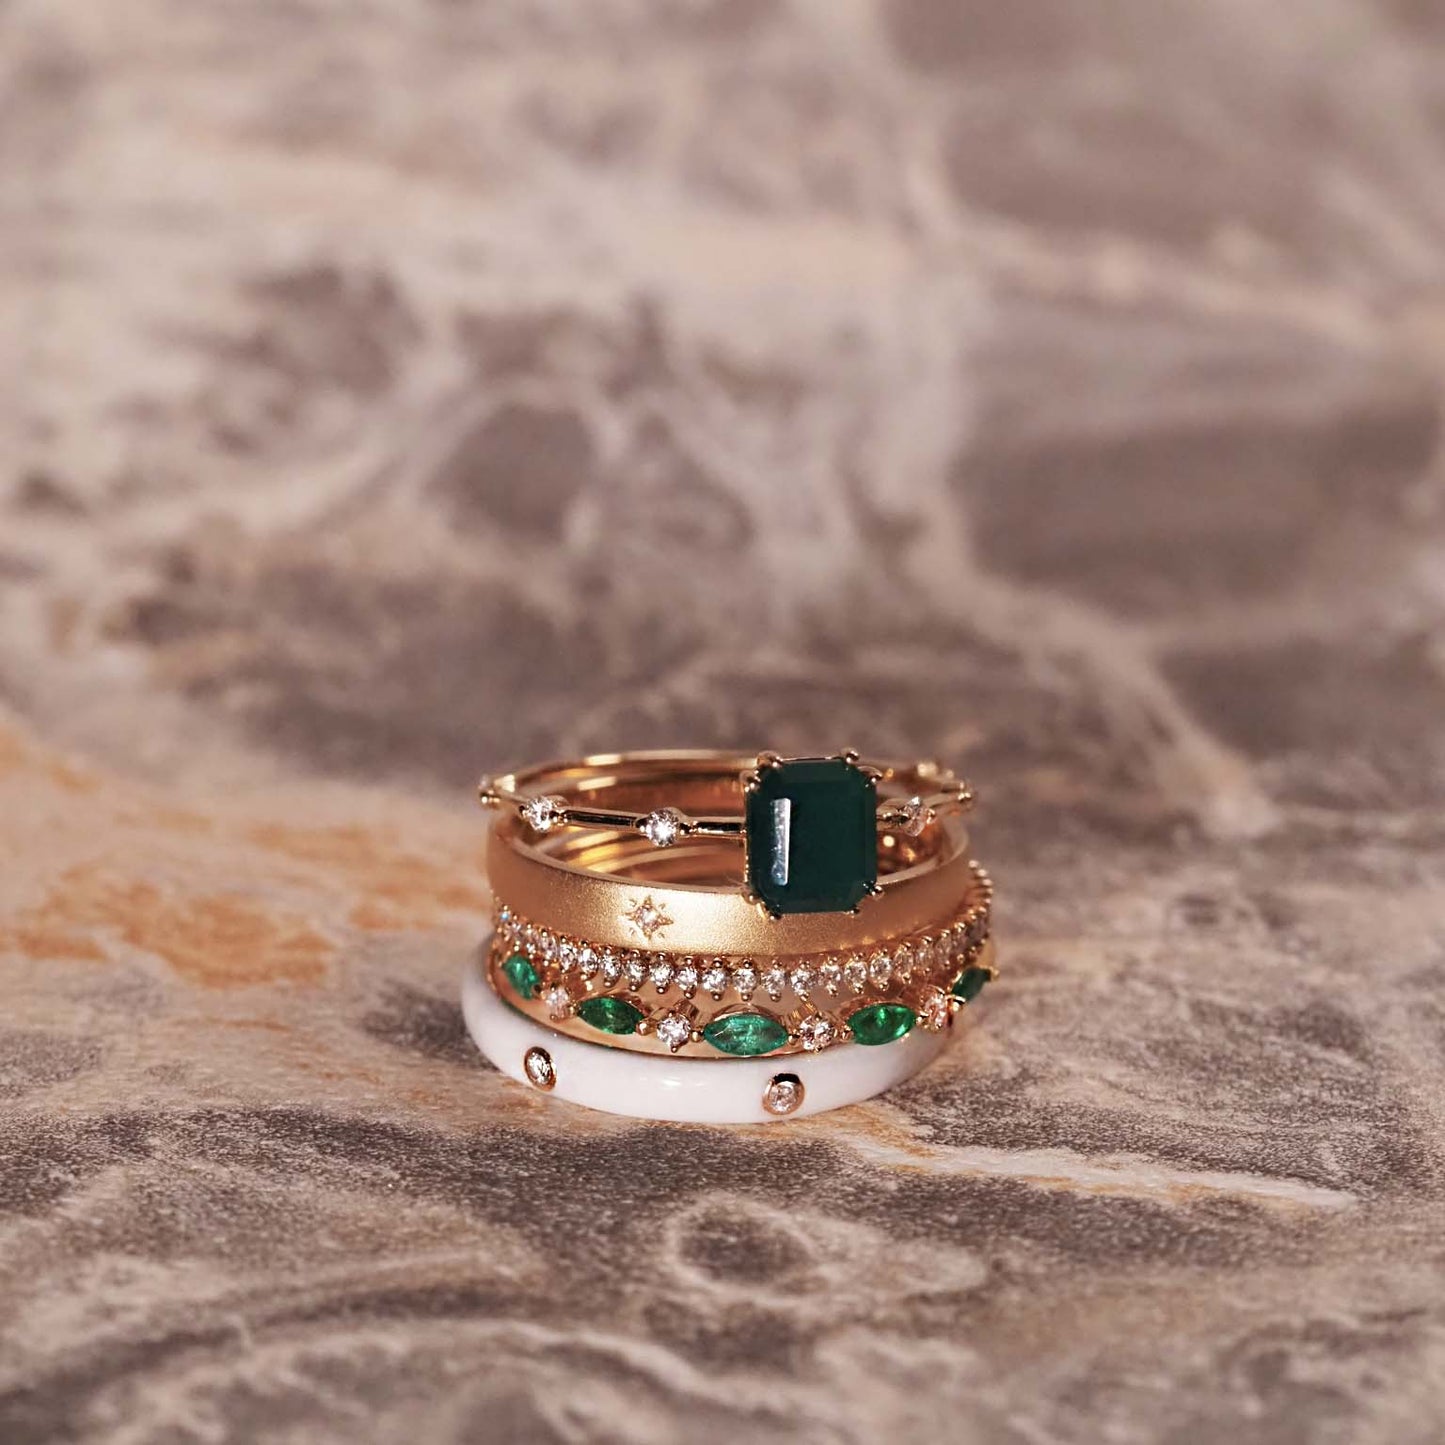 Firefly Ring with Green Onyx